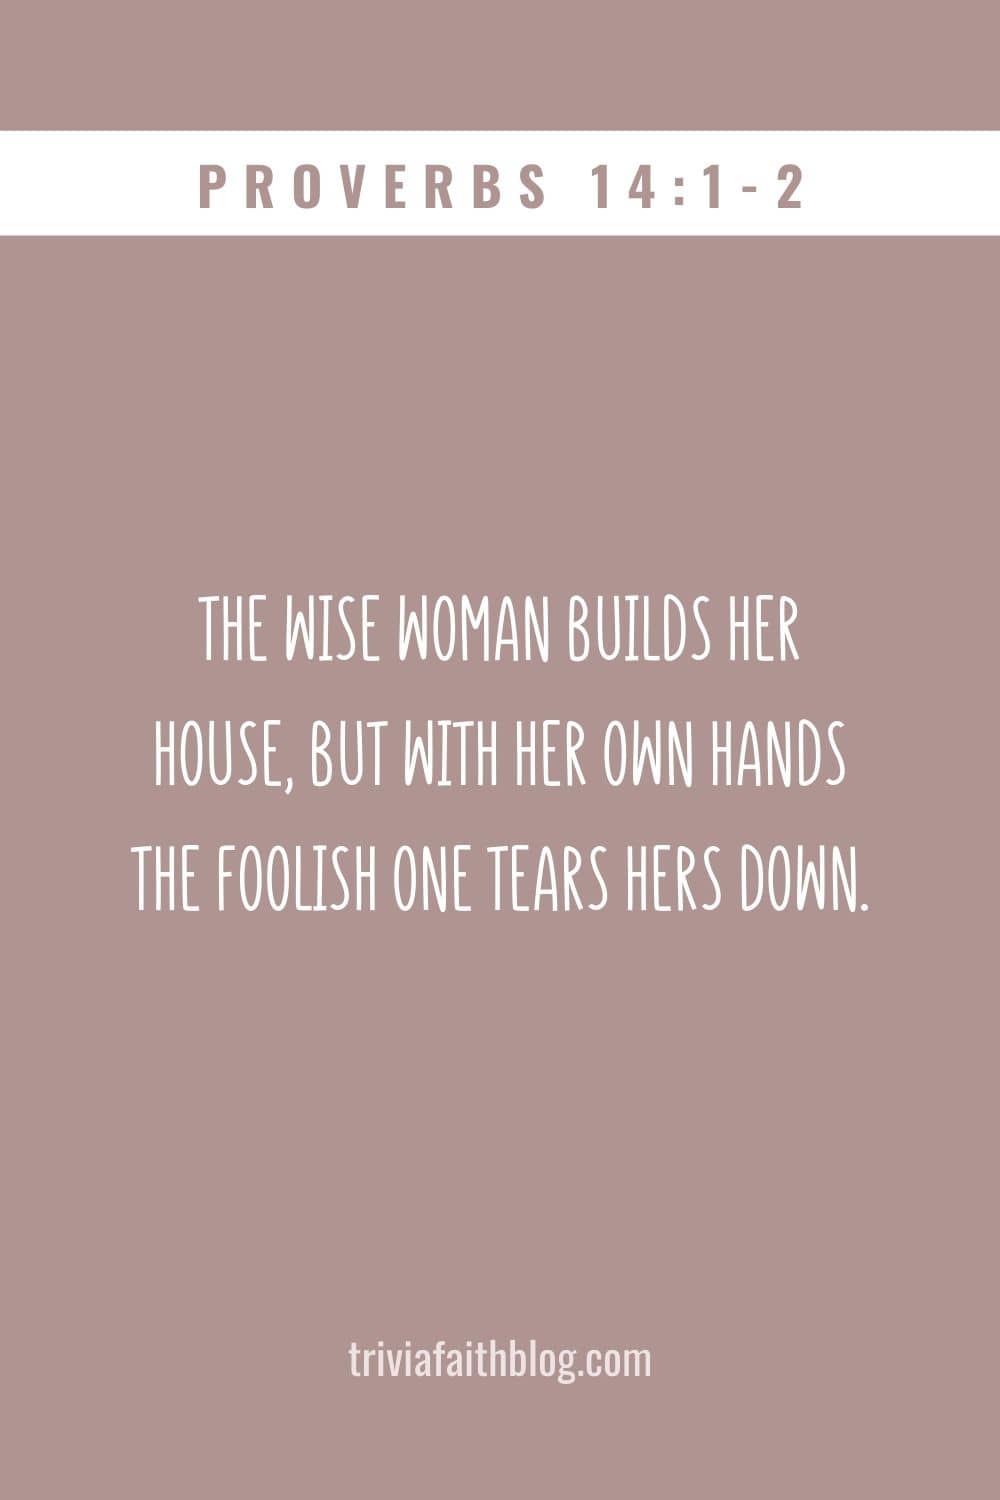 The wise woman builds her house, but with her own hands the foolish one tears hers down